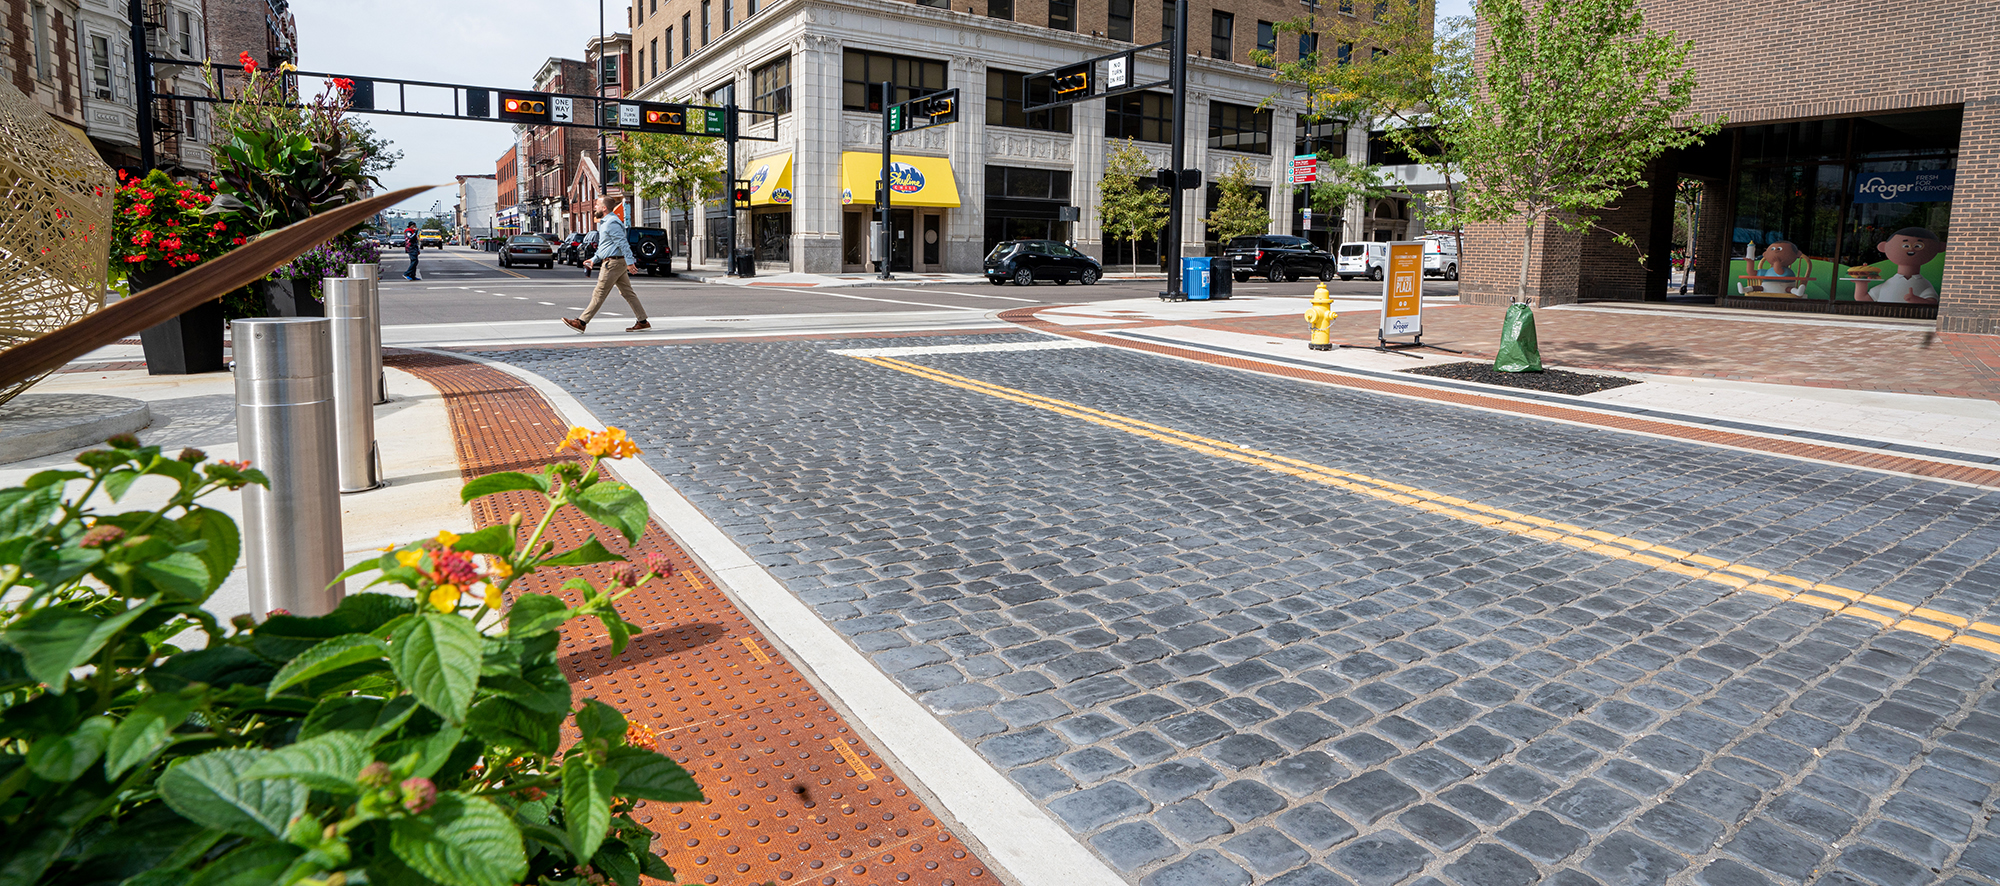 Blue Courtstone pavers occupy the roadway, with painted yellow lines dividing the lanes, and gentle soft scaping decorating street corners.